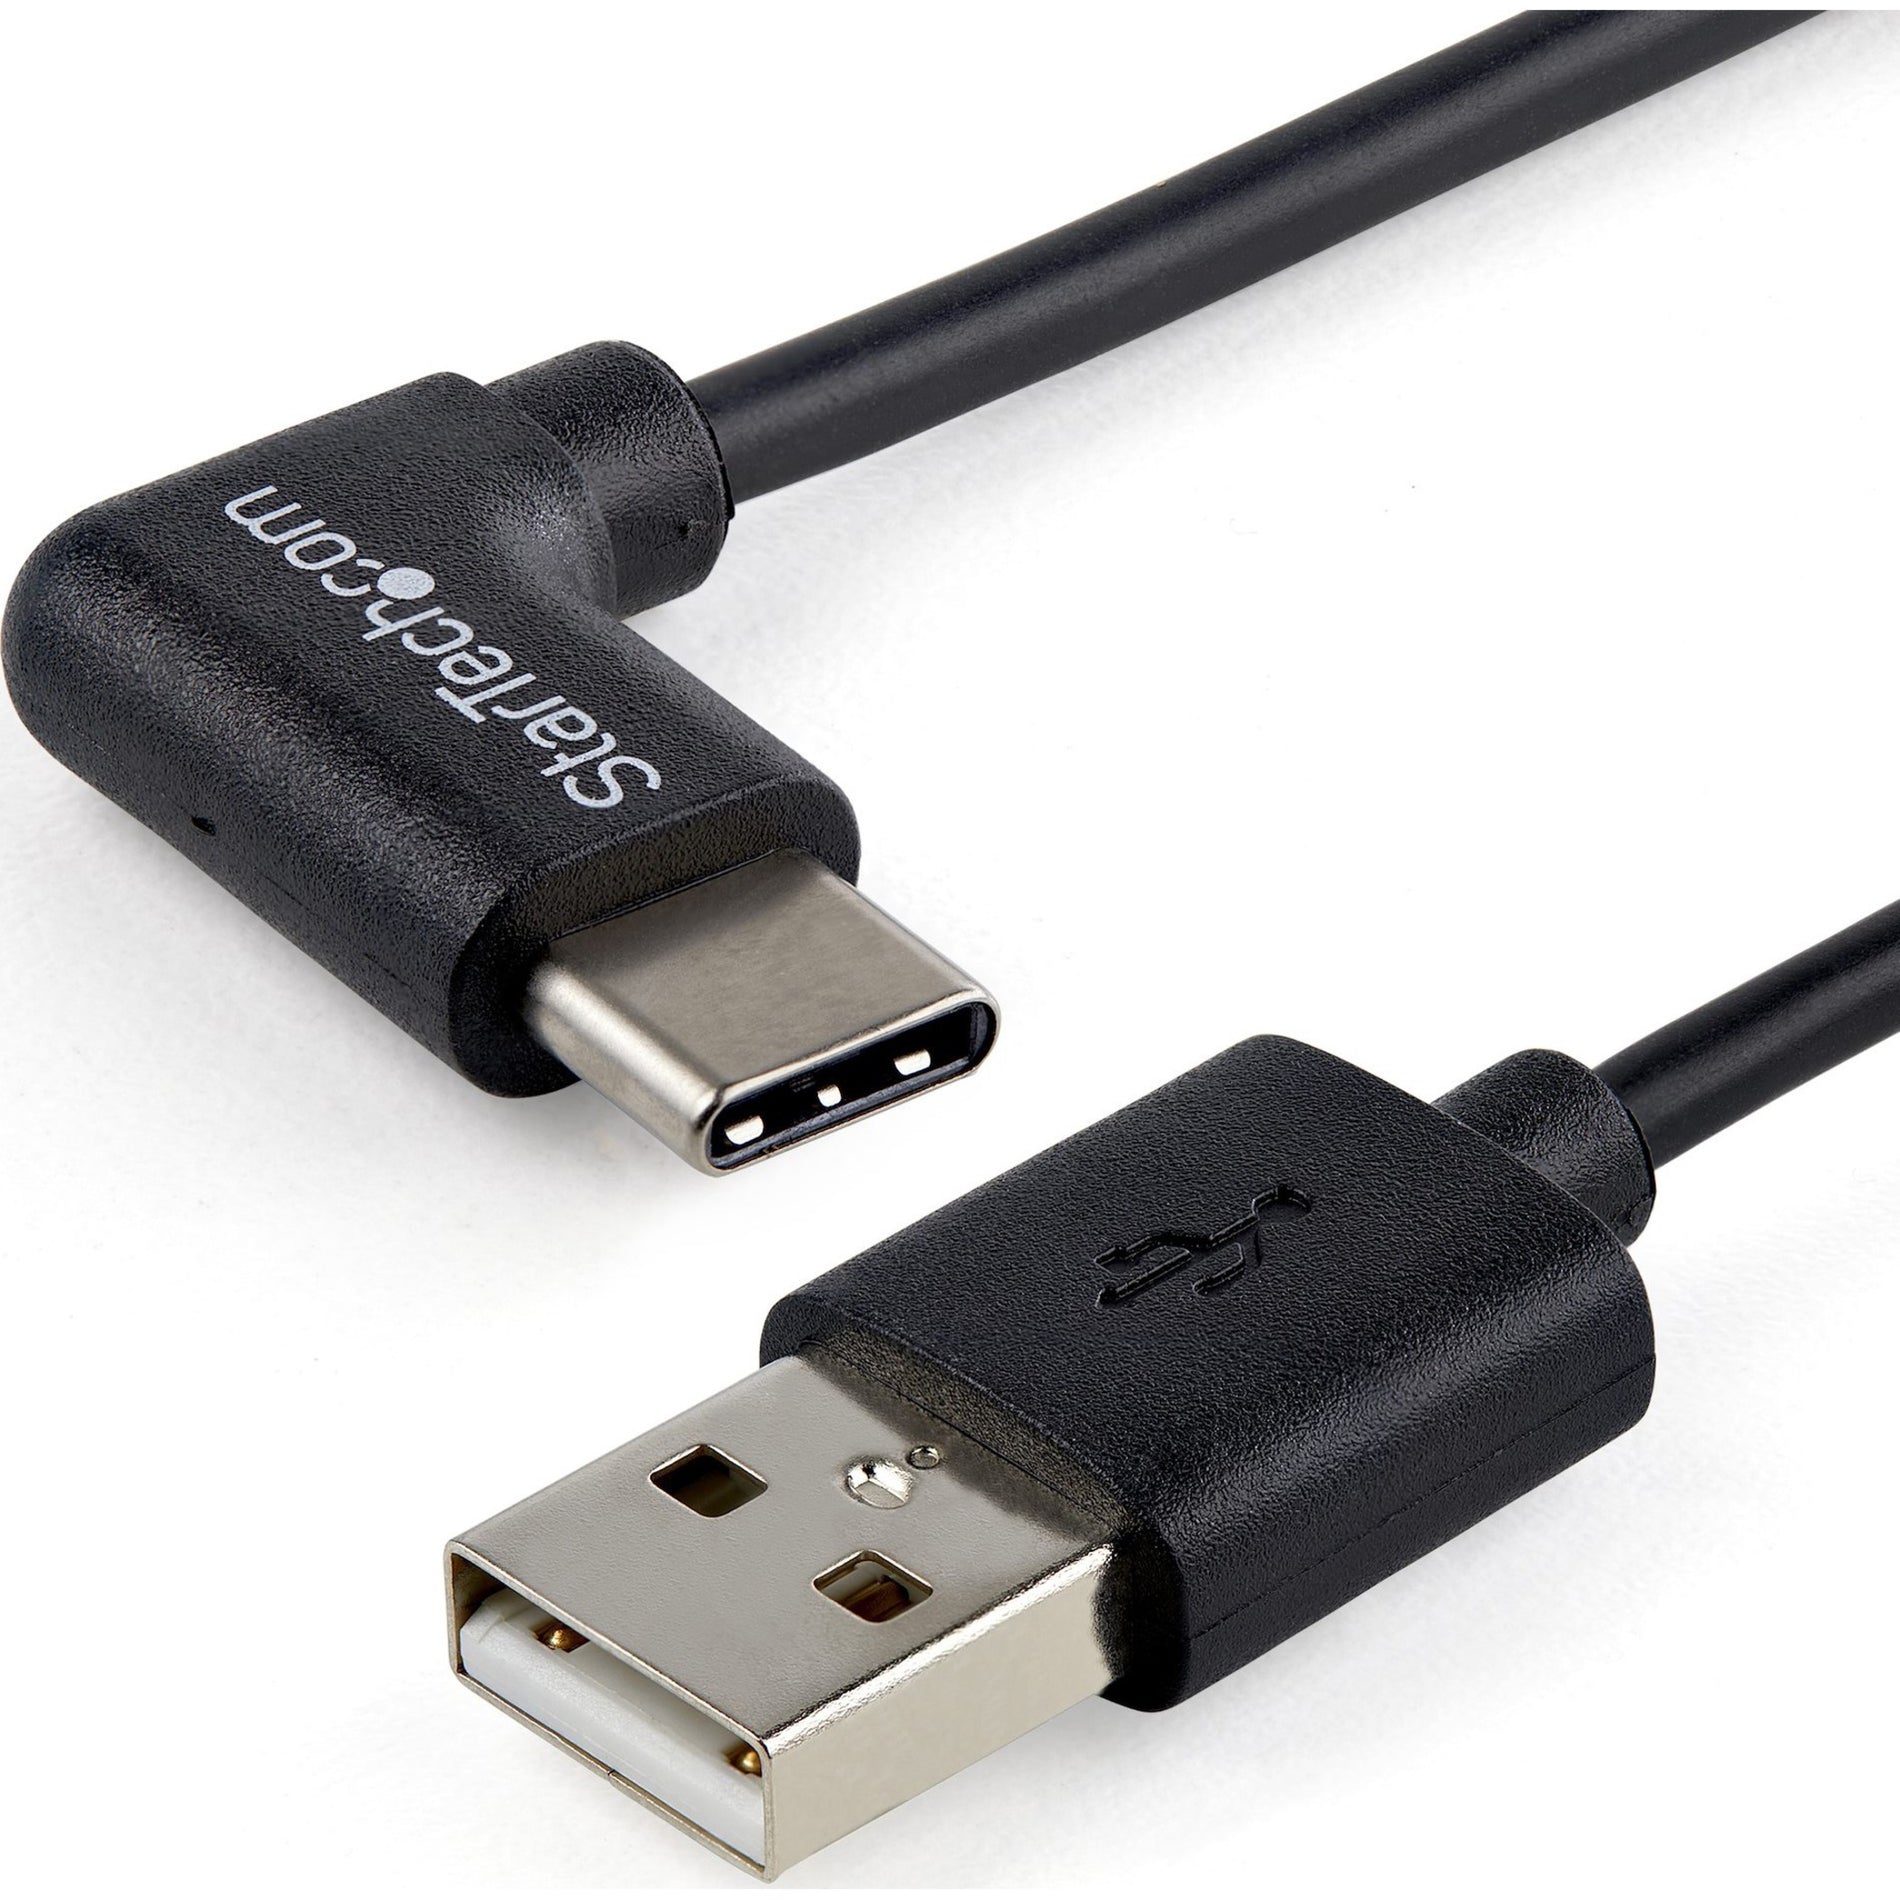 StarTech.com USB2AC1MR USB-A to USB-C Cable - Right-Angle - 1m 3ft, Fast Charging, Data Transfer, Bend Resistant